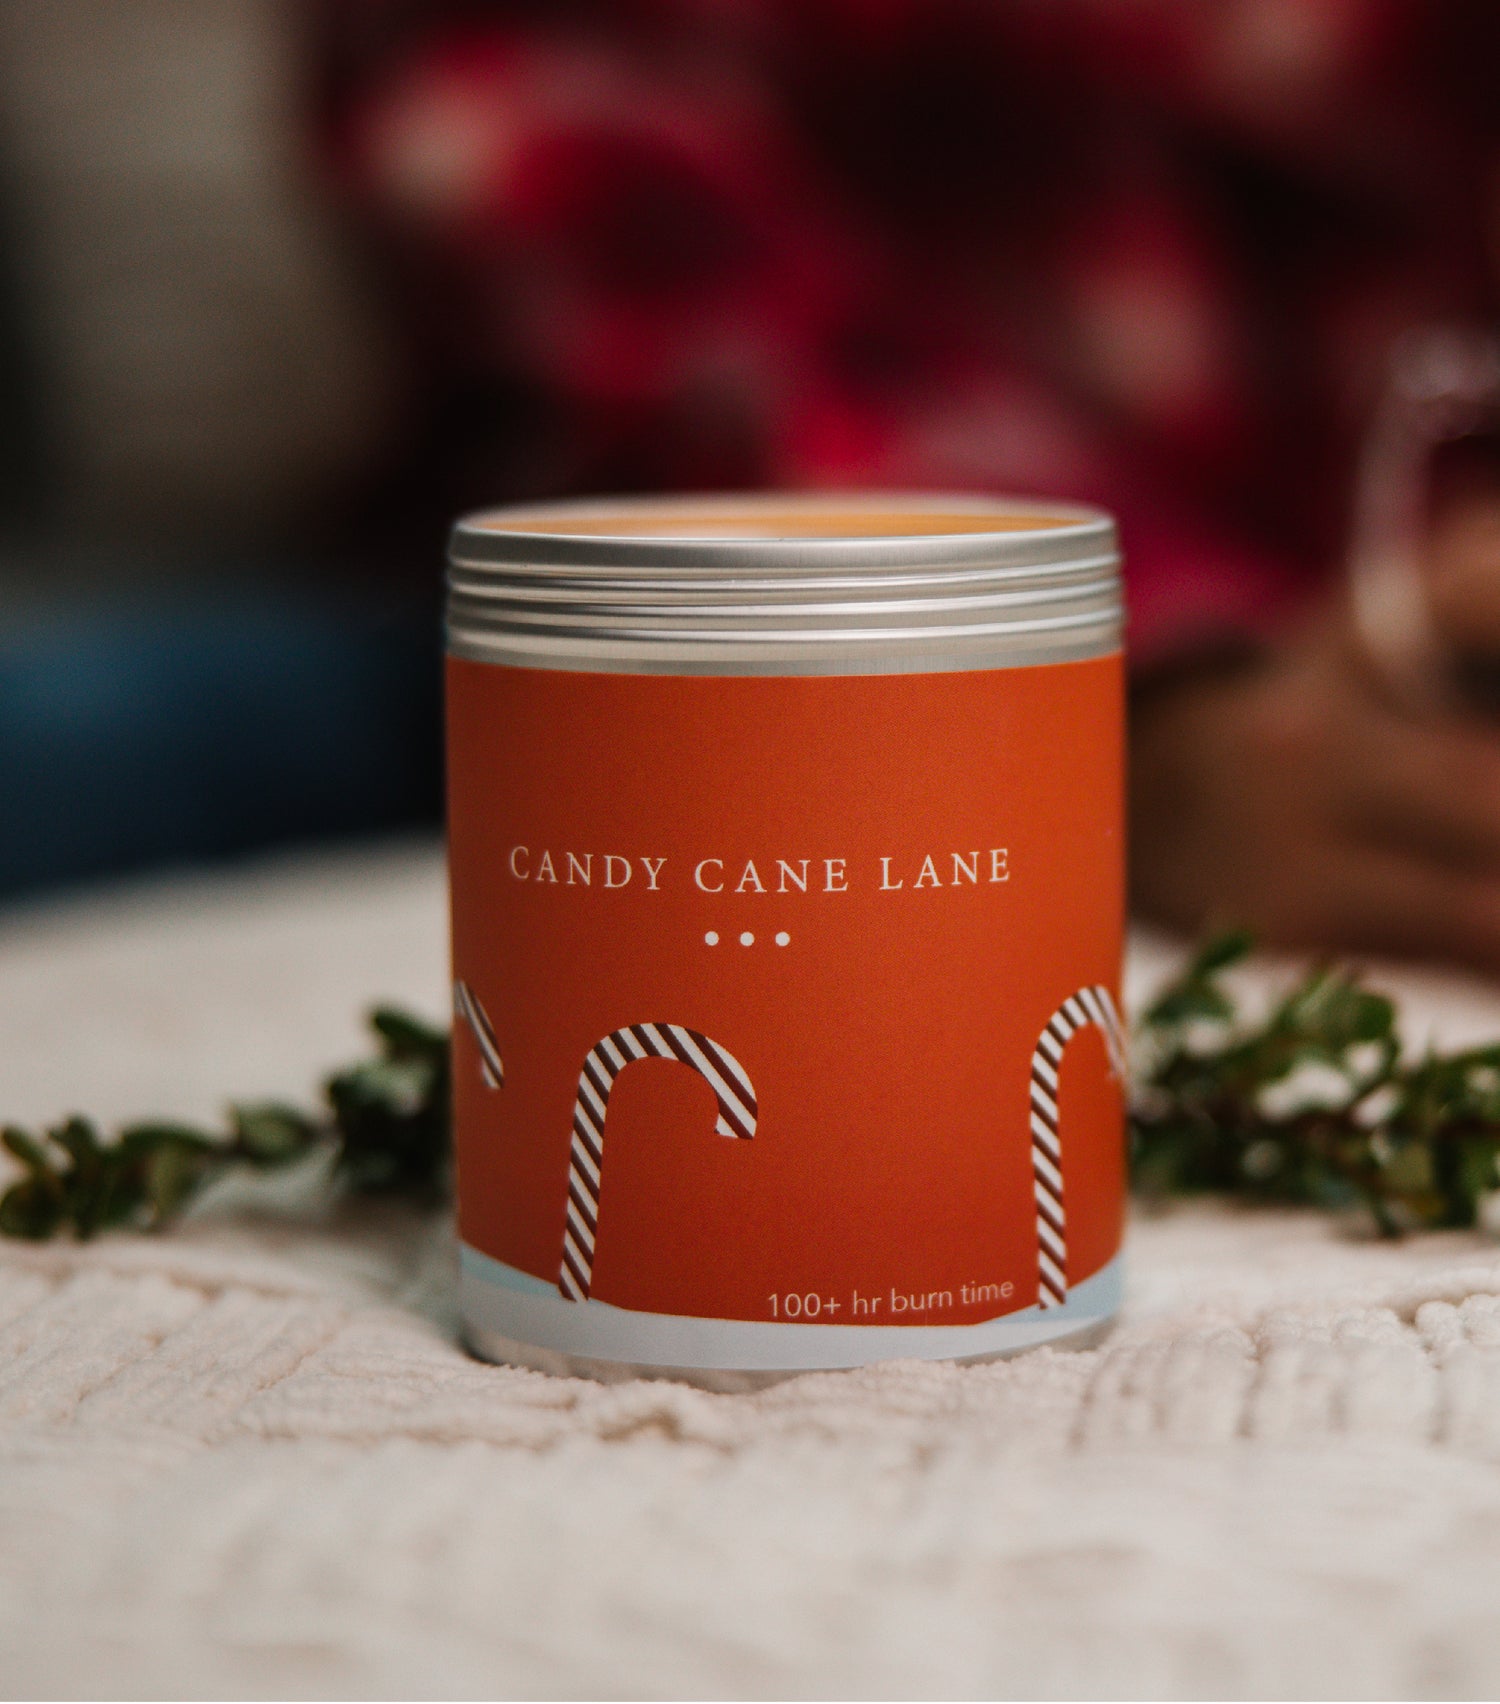 A Large Red Candle Tin with images of Candy Canes on the side. Made in Kalamazoo, MI USA. Scented with Frosted Citrus, Crushed Peppermint, and Sugar.